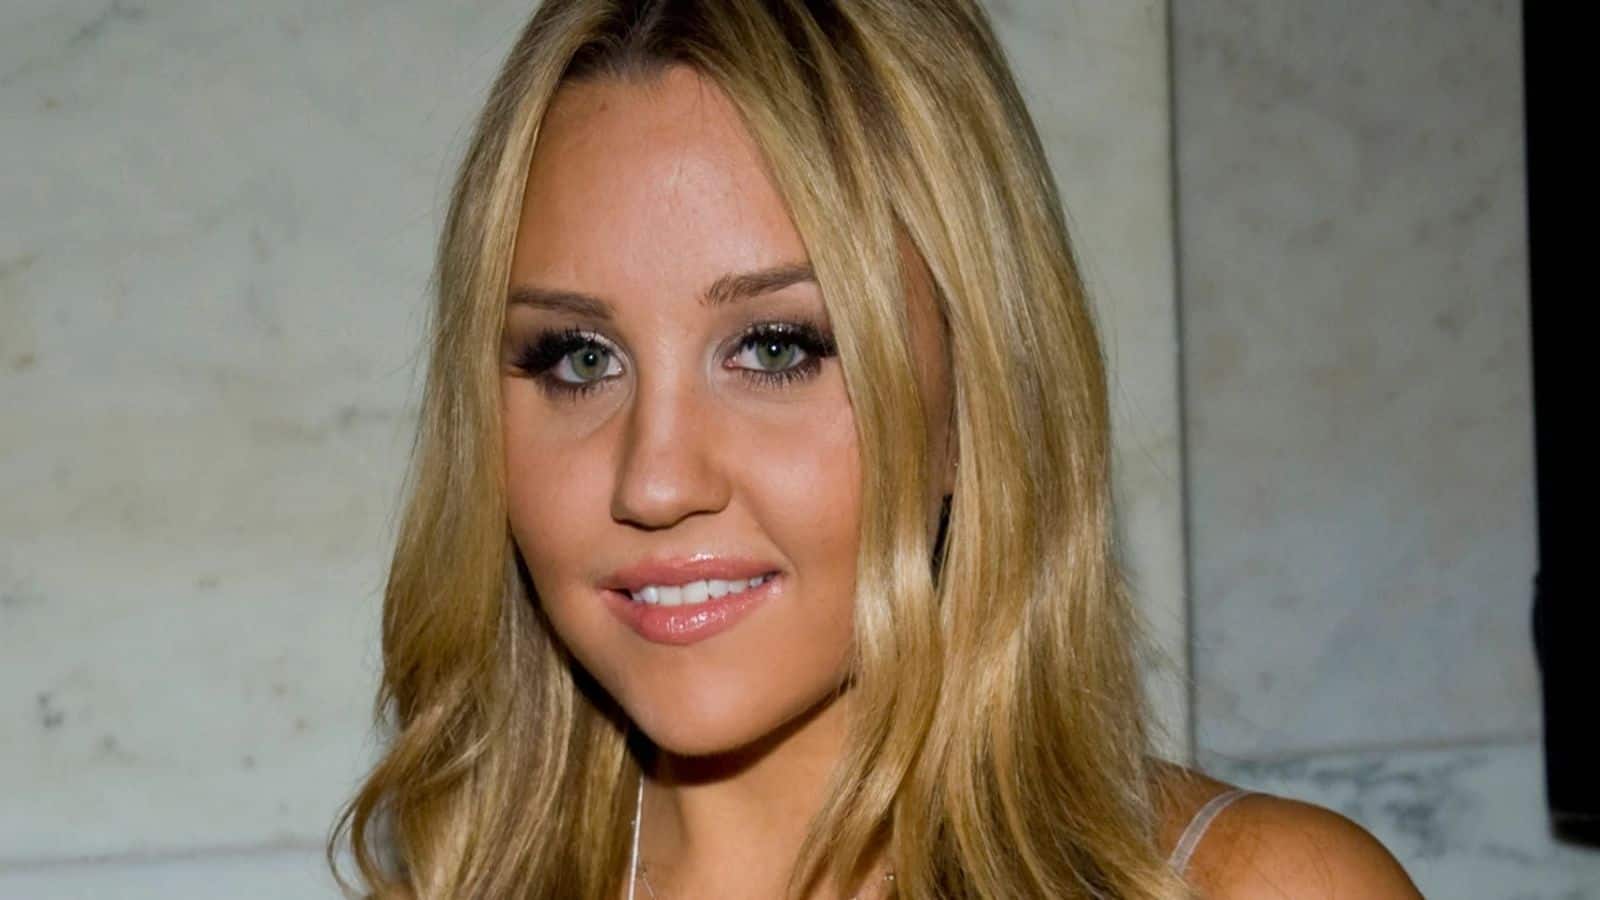 Fame to tragedy: Reflecting on Nickelodeon star Amanda Bynes's journey